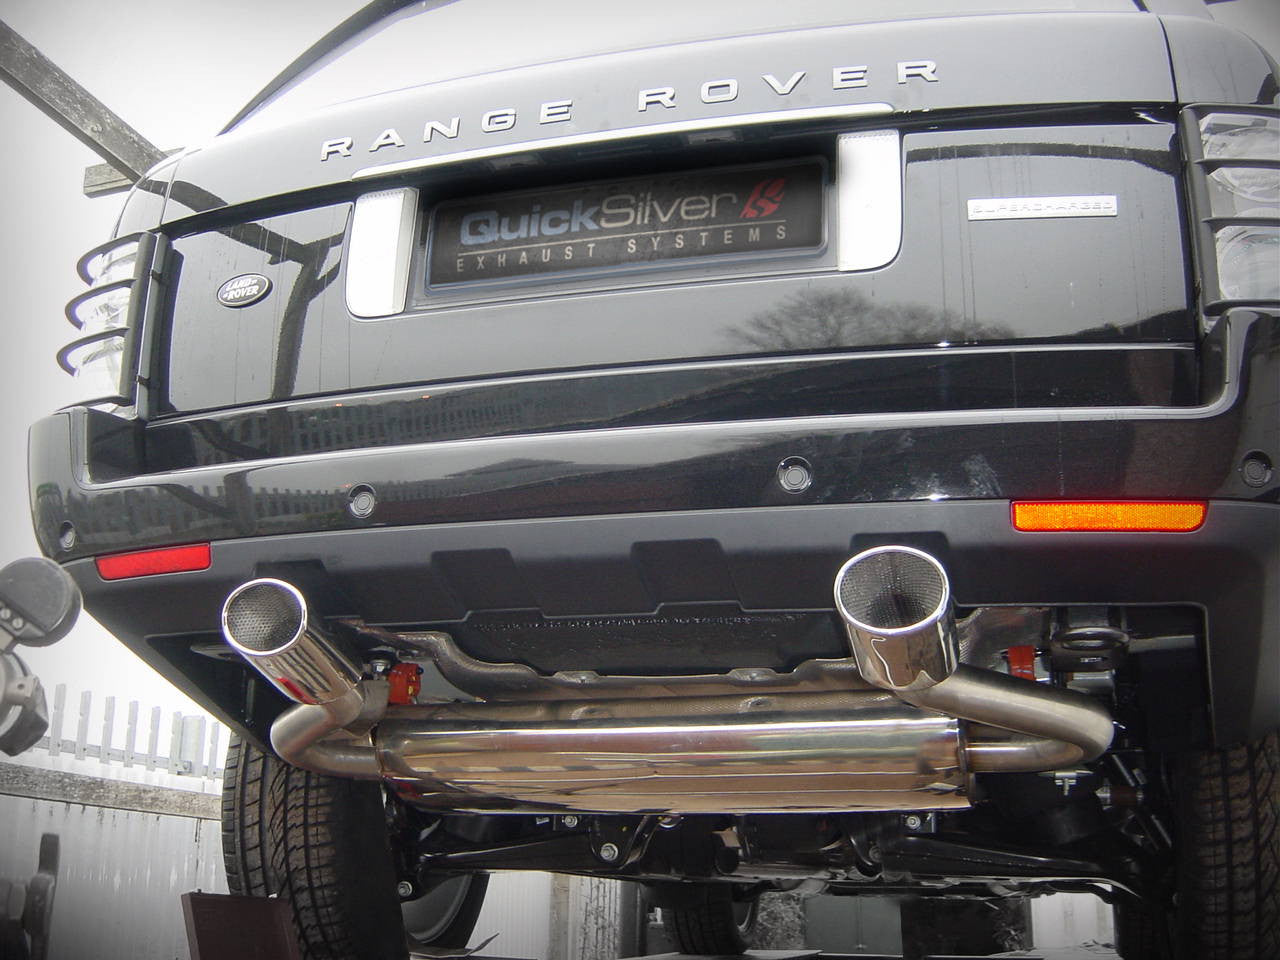 Range Rover 4.2 Super Charged Sport Exhaust (2005-09) - QuickSilver Exhausts